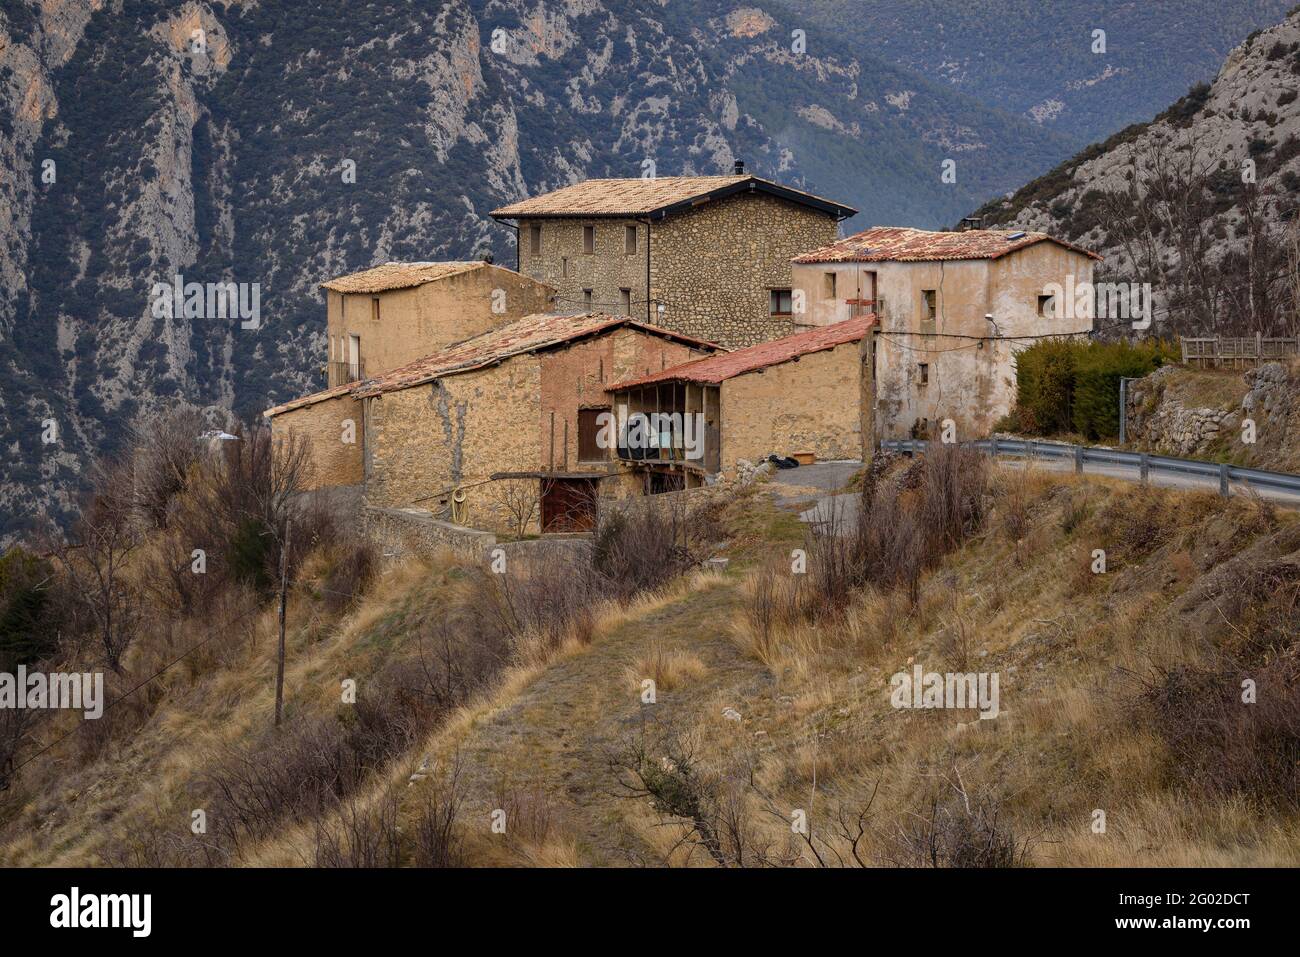 Voloriu Village, with the Prada mountain range in the background, in the  Organyà valley (Alt Urgell, Catalonia, Spain, Pyrenees Stock Photo - Alamy